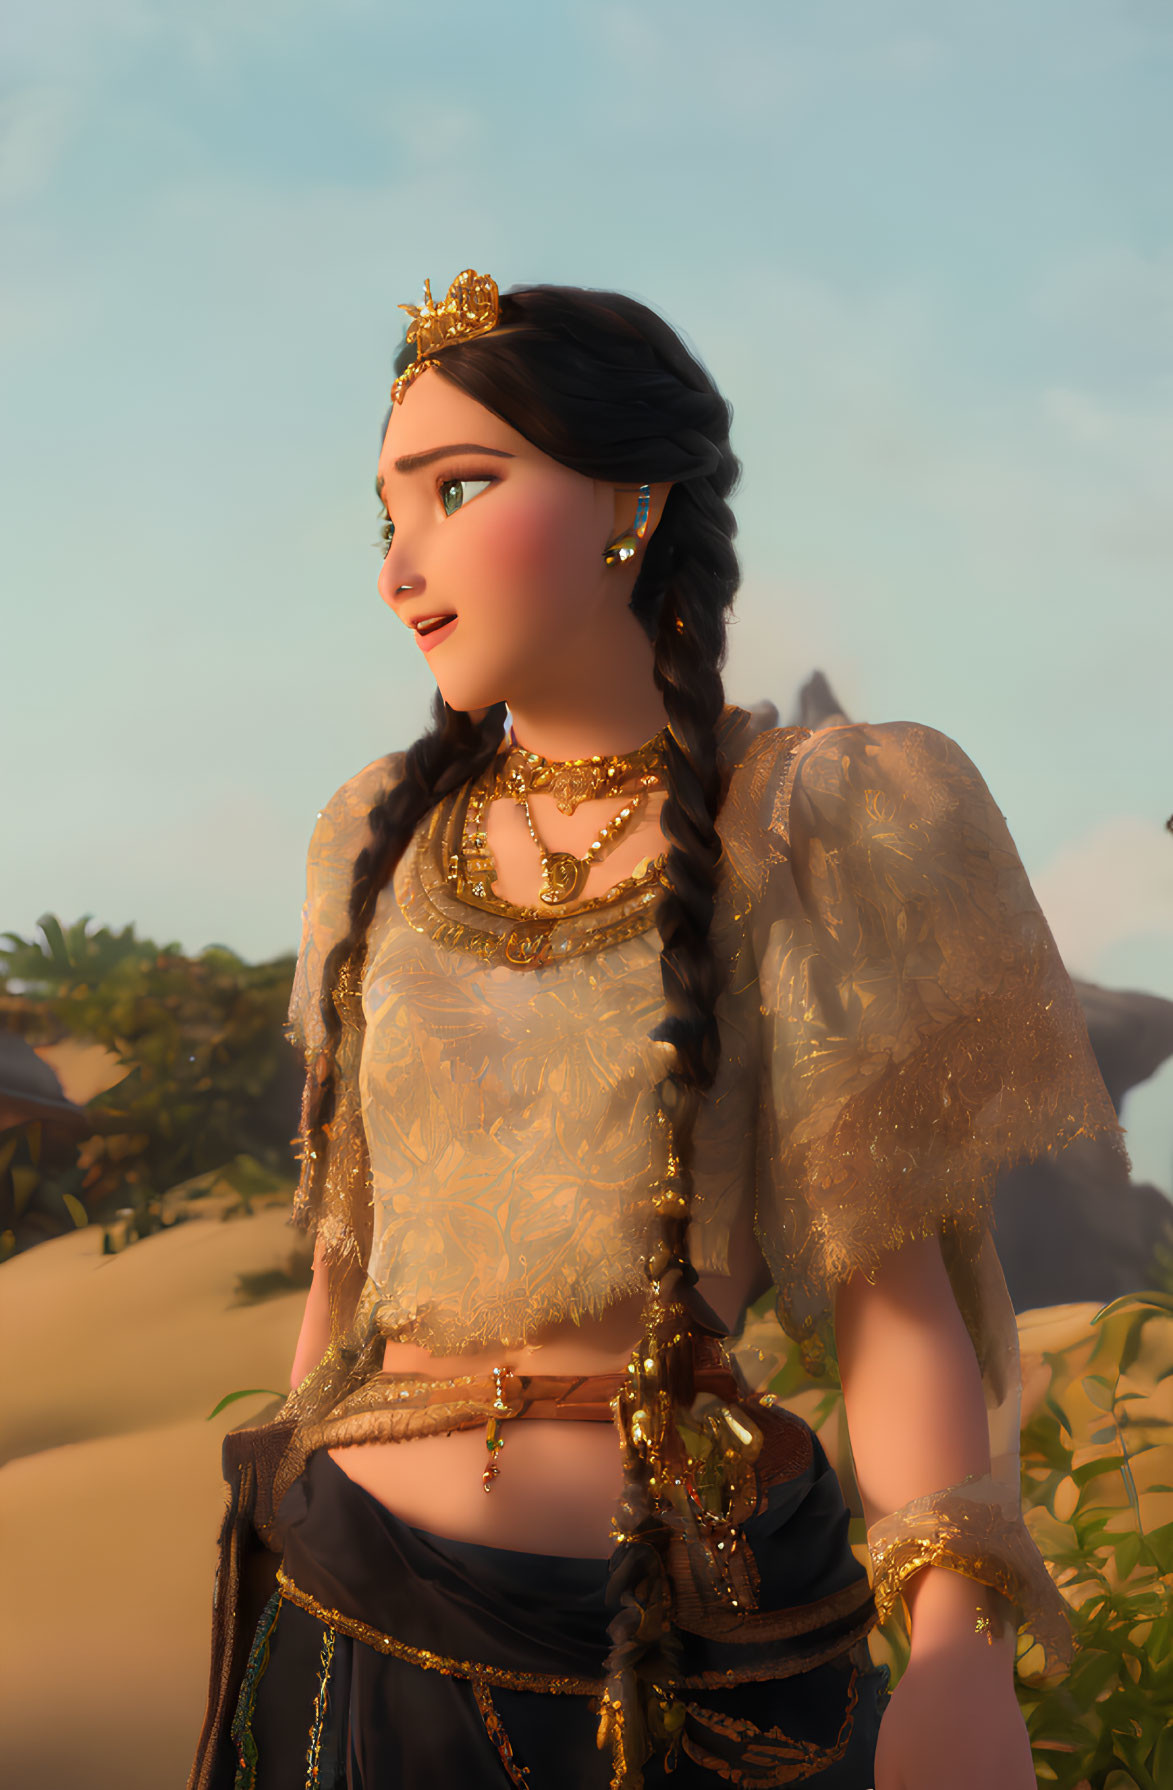 Animated woman with braid in gold jewelry and sheer blouse against warm sky